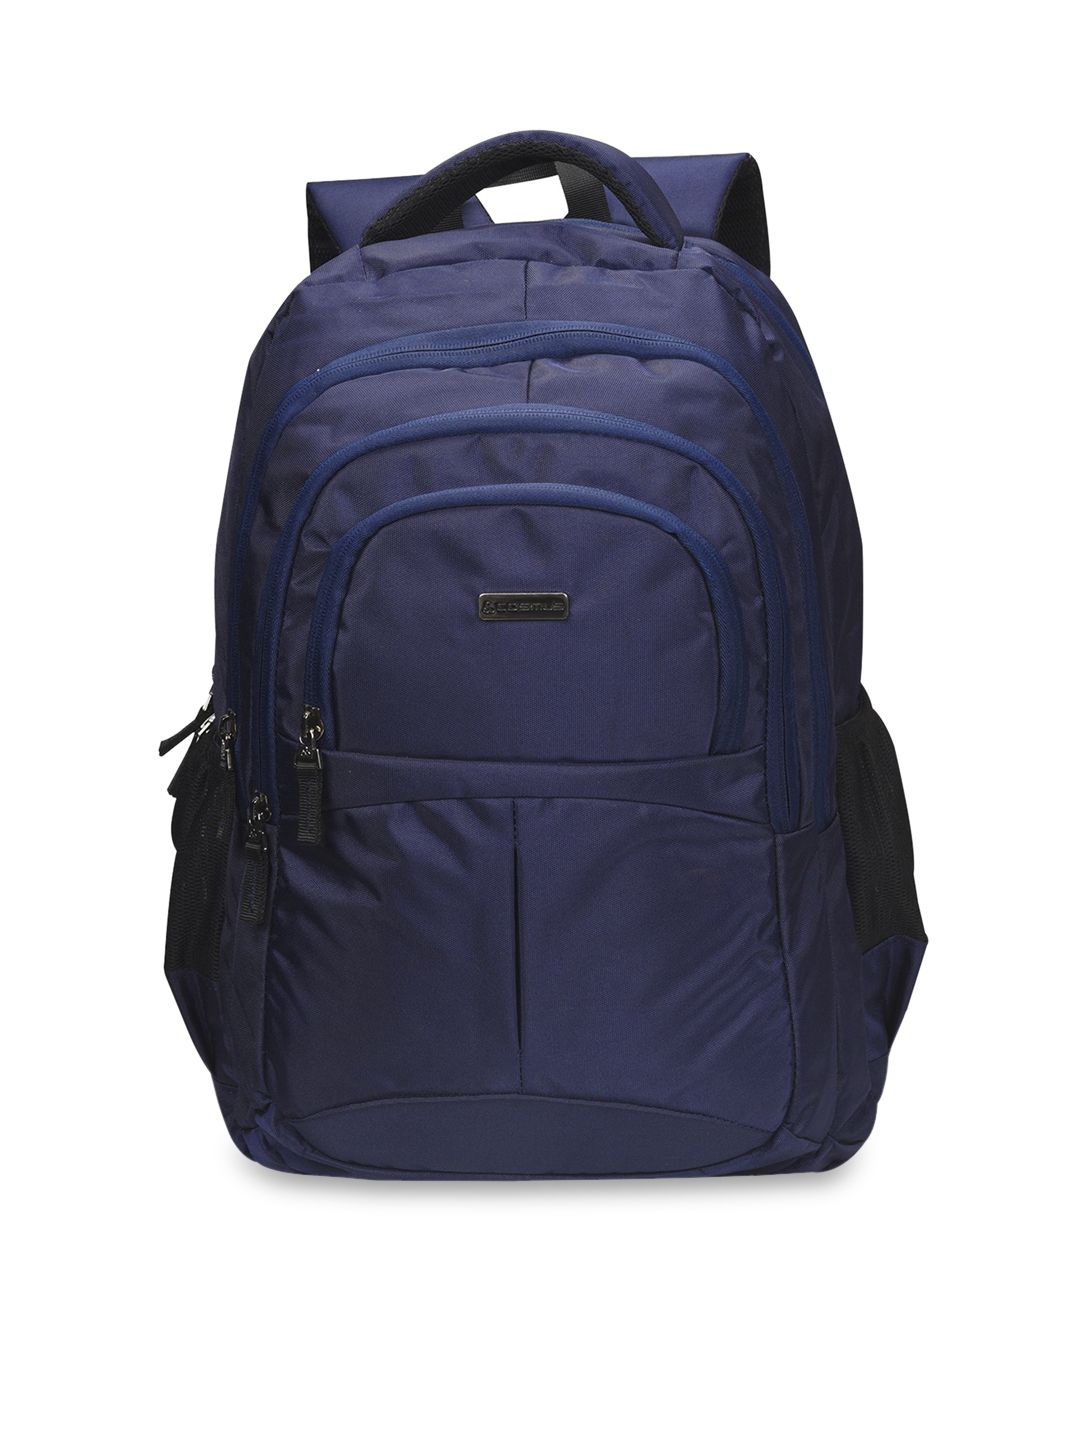 COSMUS Unisex Navy Blue Solid Backpack Price in India